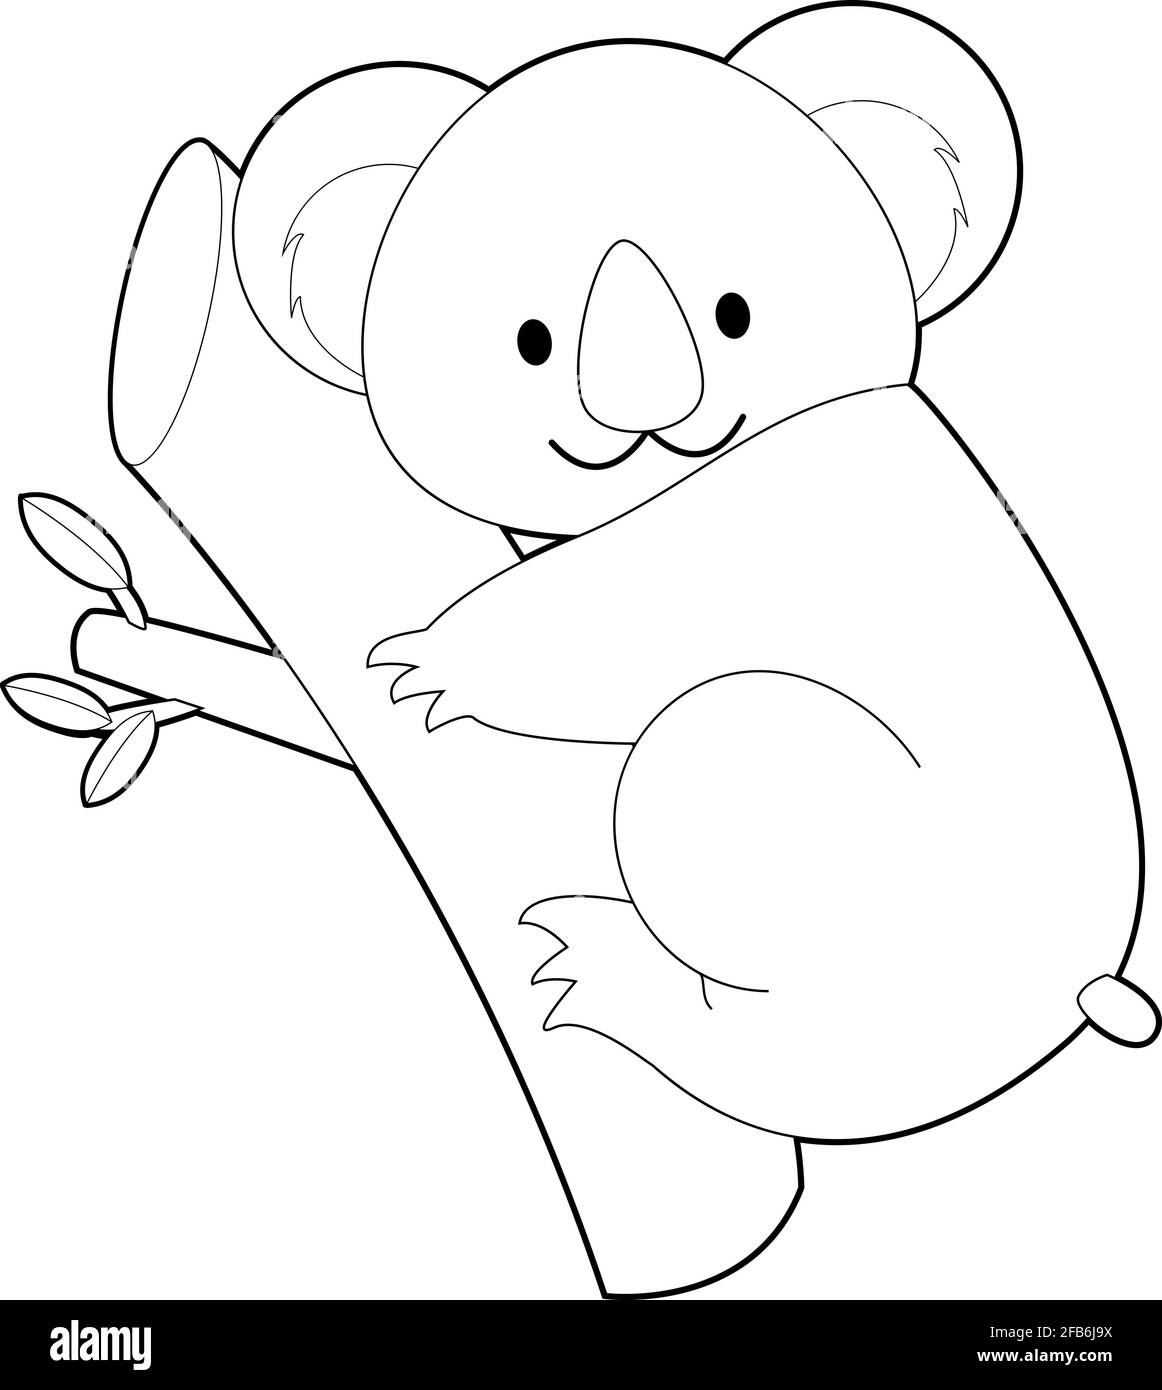 Easy Coloring drawings of animals for little kids Koala Stock ...